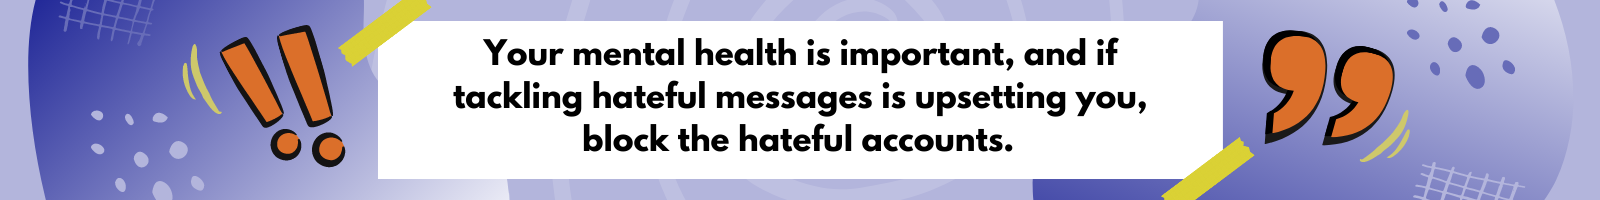 Your mental health is important, and if tackling hateful messages is upsetting you, block the hateful accounts.